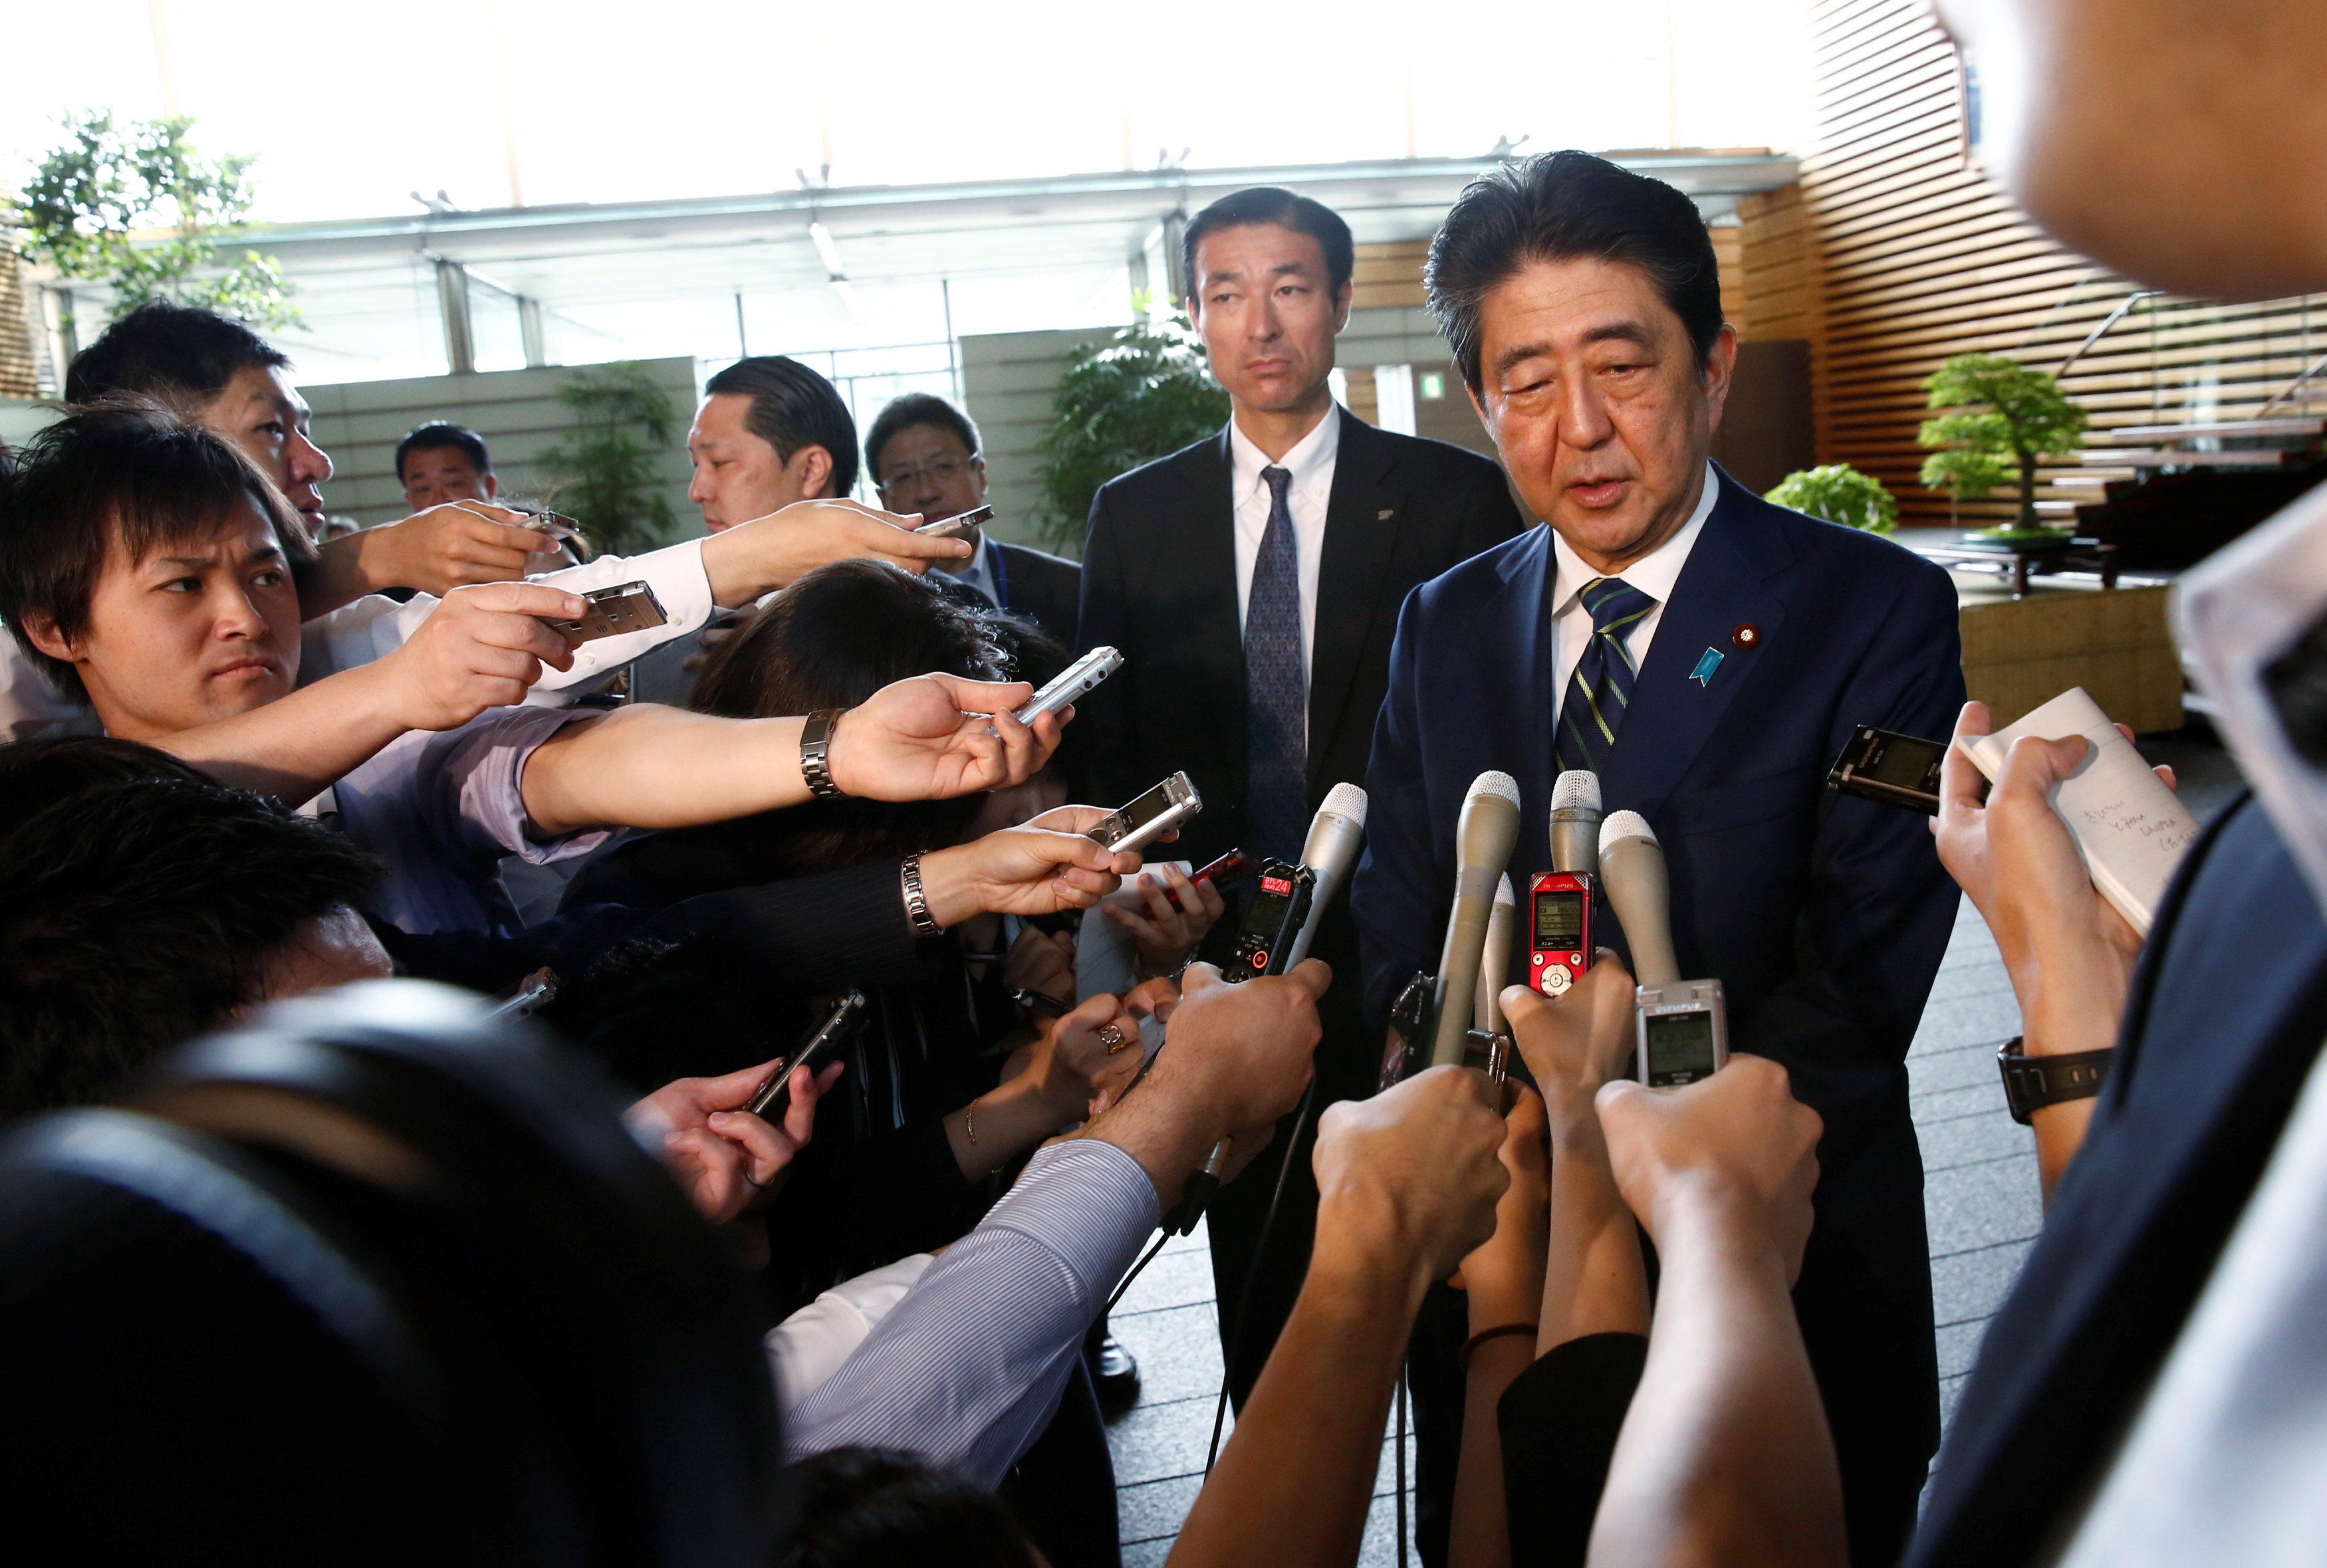 Japan PM's party suffers historic defeat in Tokyo poll, popular governor wins big